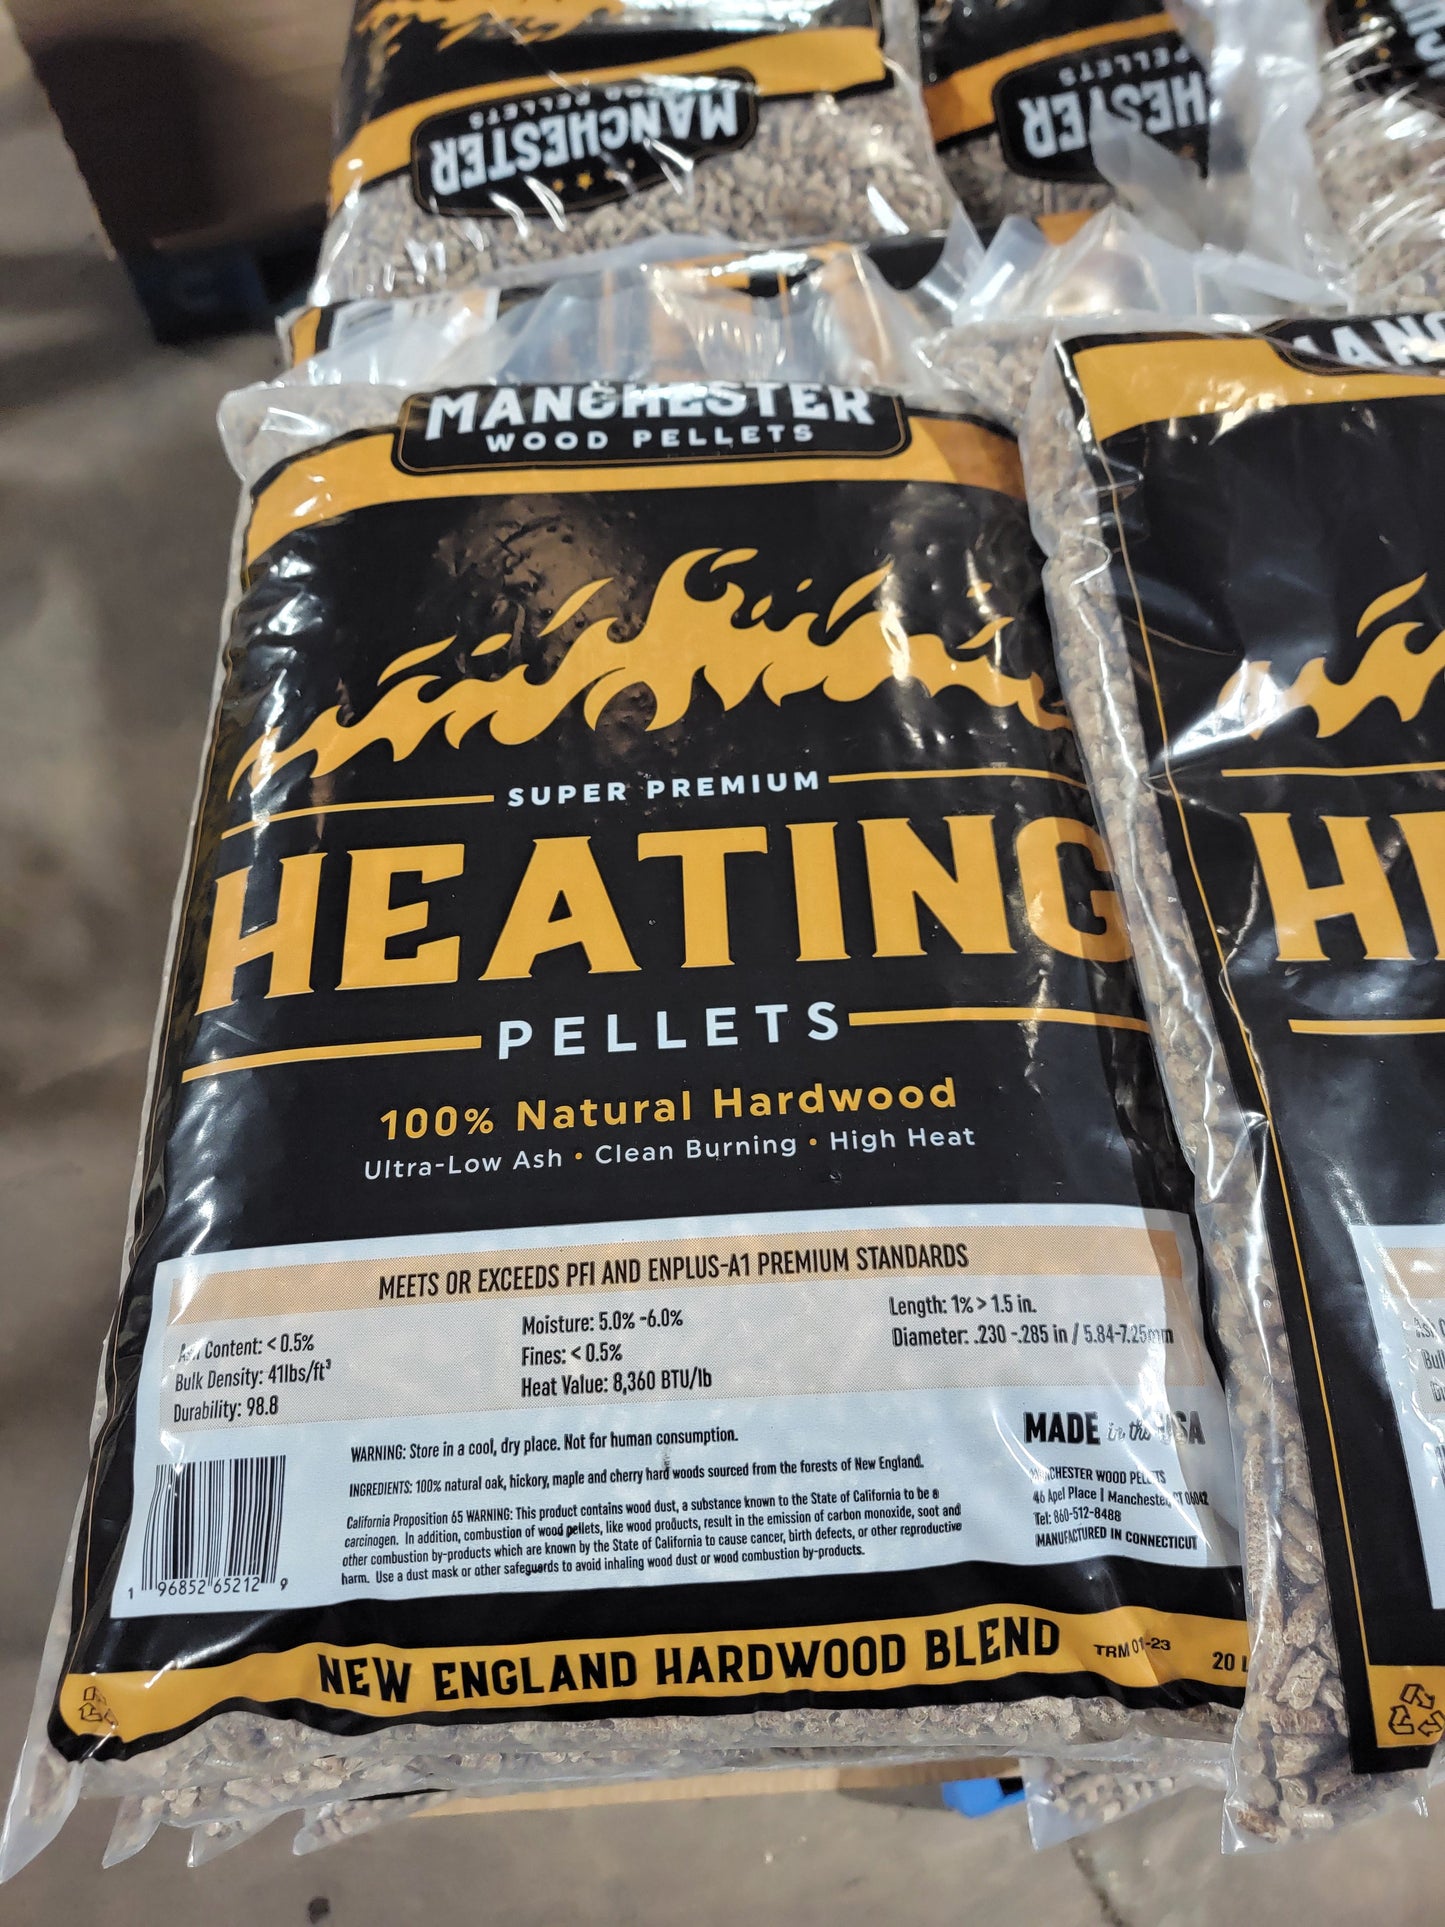 Premium heating pellets for use in all pellet stoves. Made in Connecticut! Buy local!